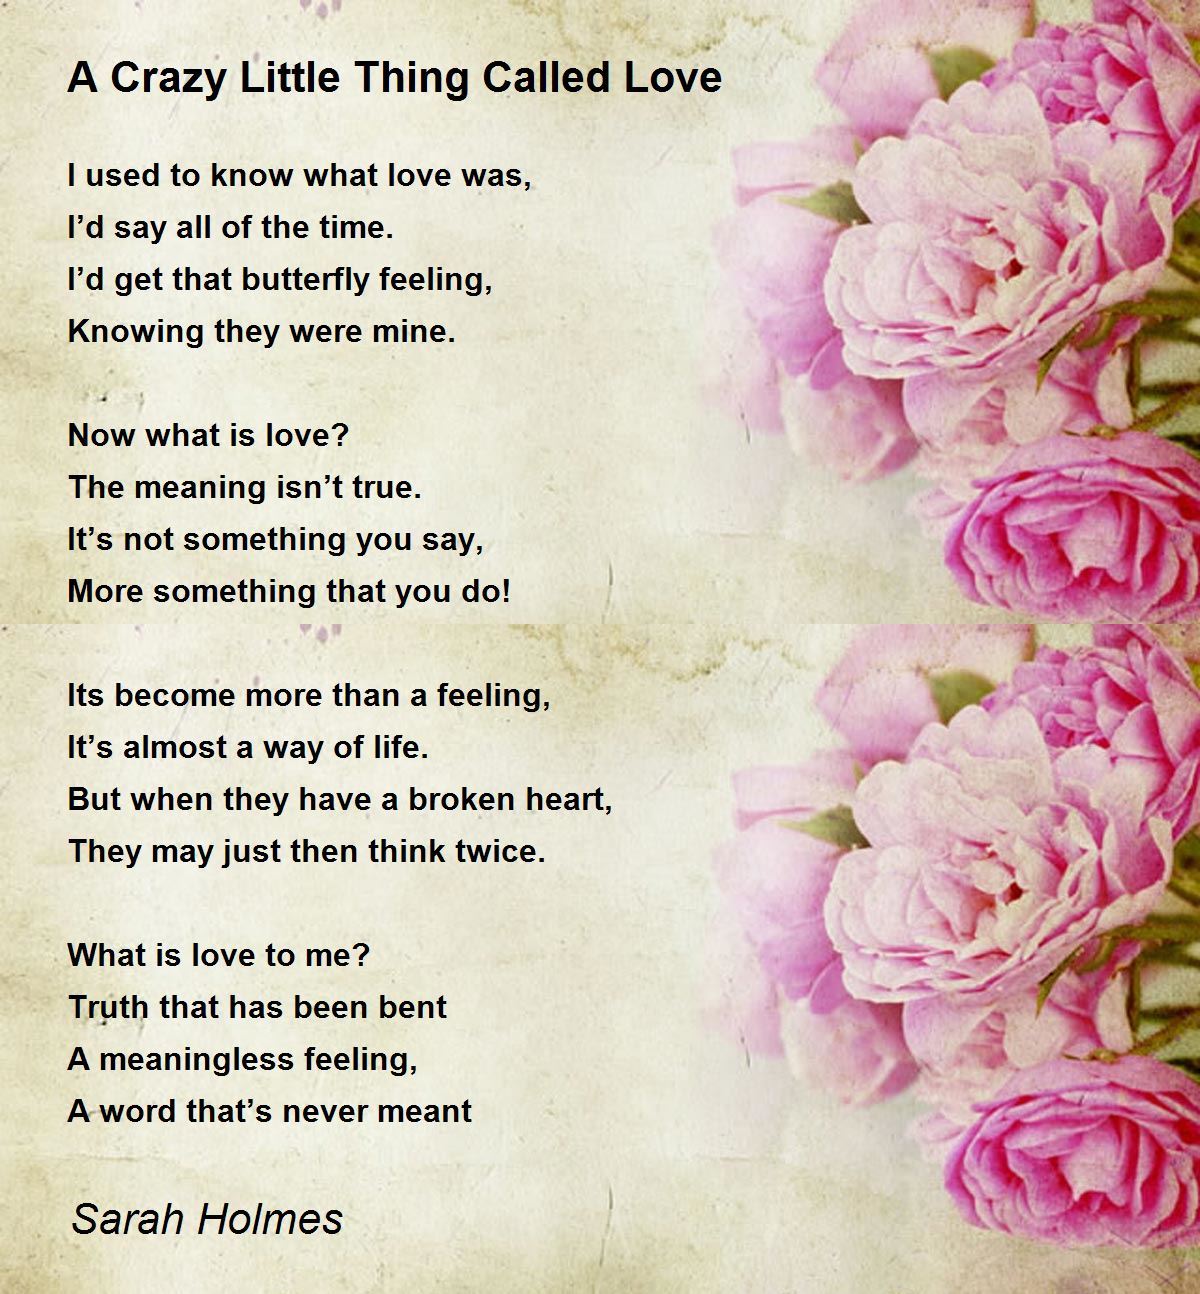 A Little Word Called Crazy! - A Little Word Called Crazy! Poem by